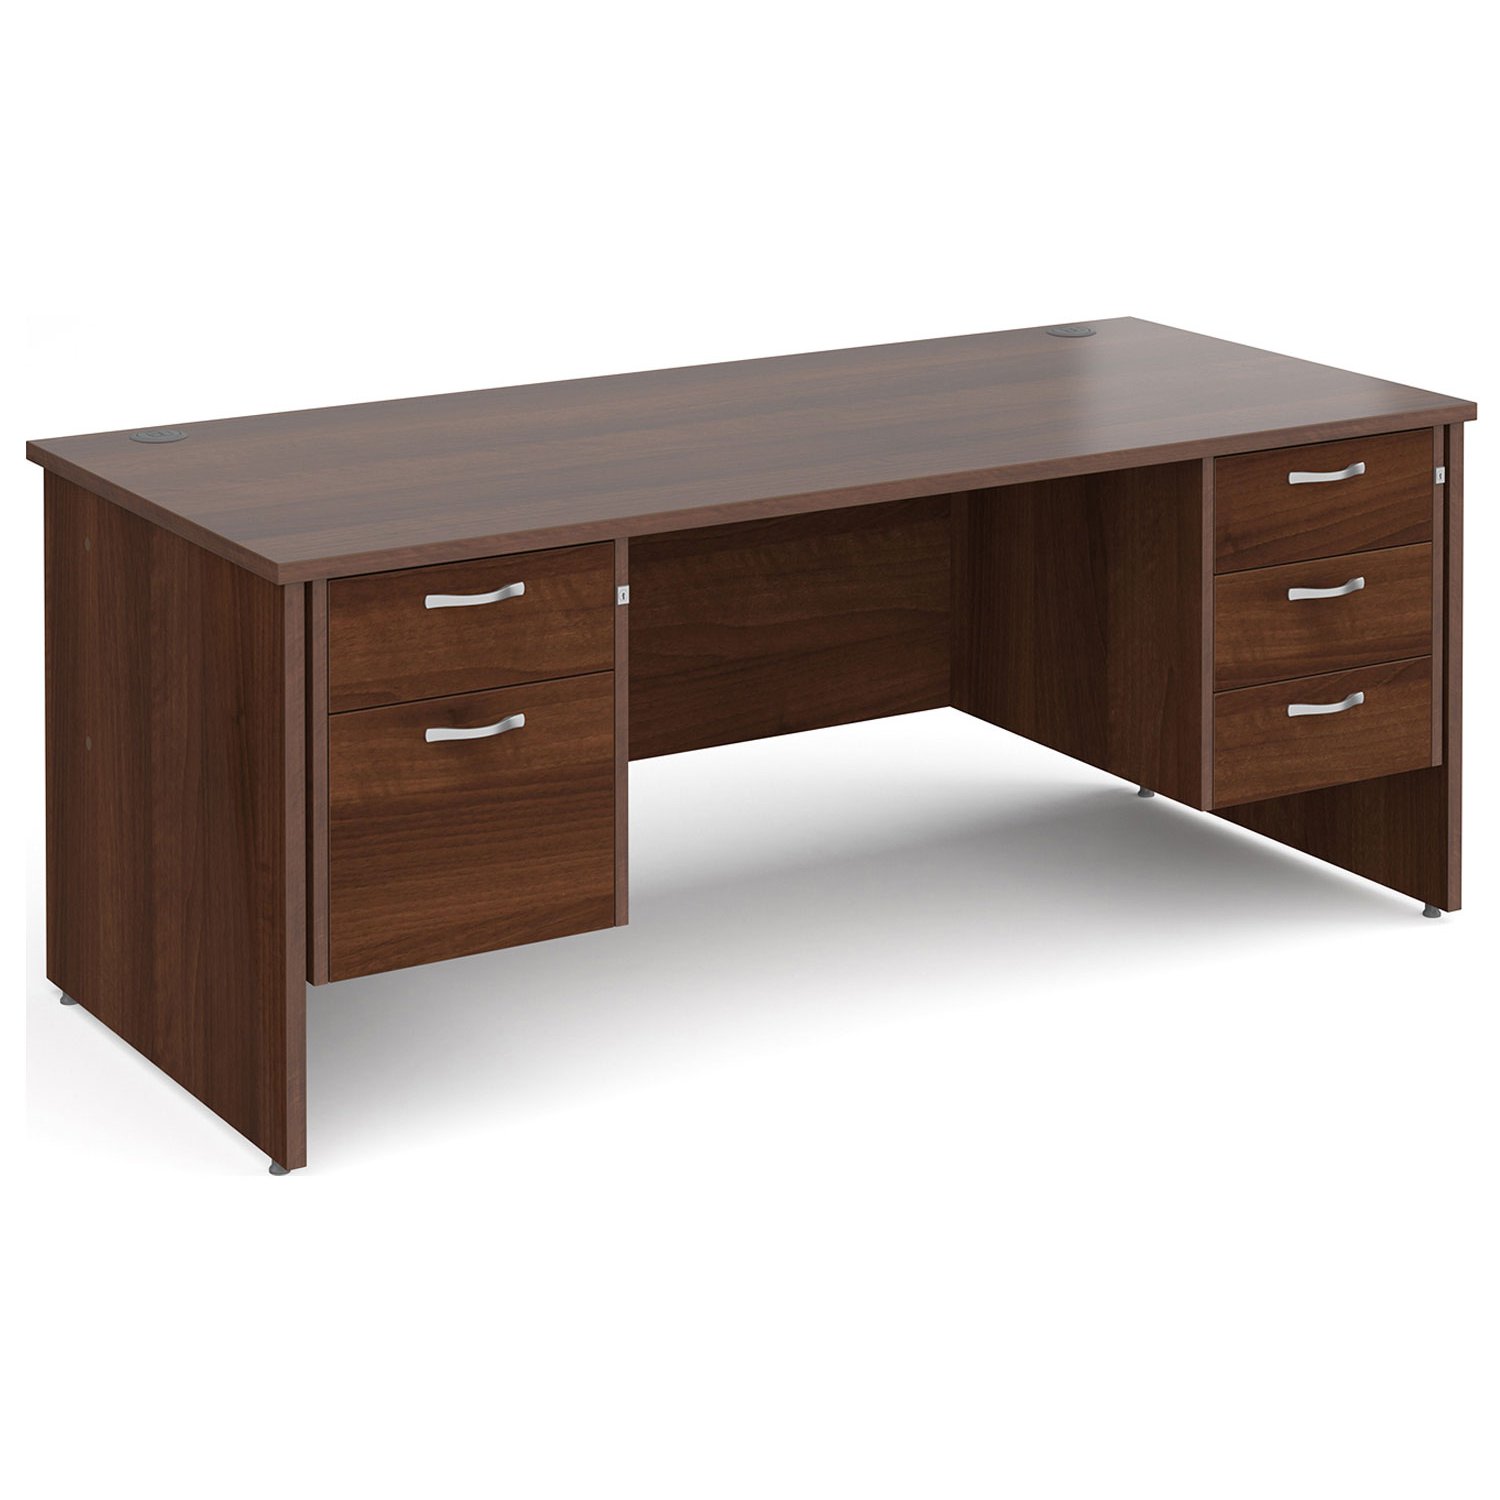 All Walnut Panel End Executive Desk 2+3 Drawers , 180wx80dx73h (cm)